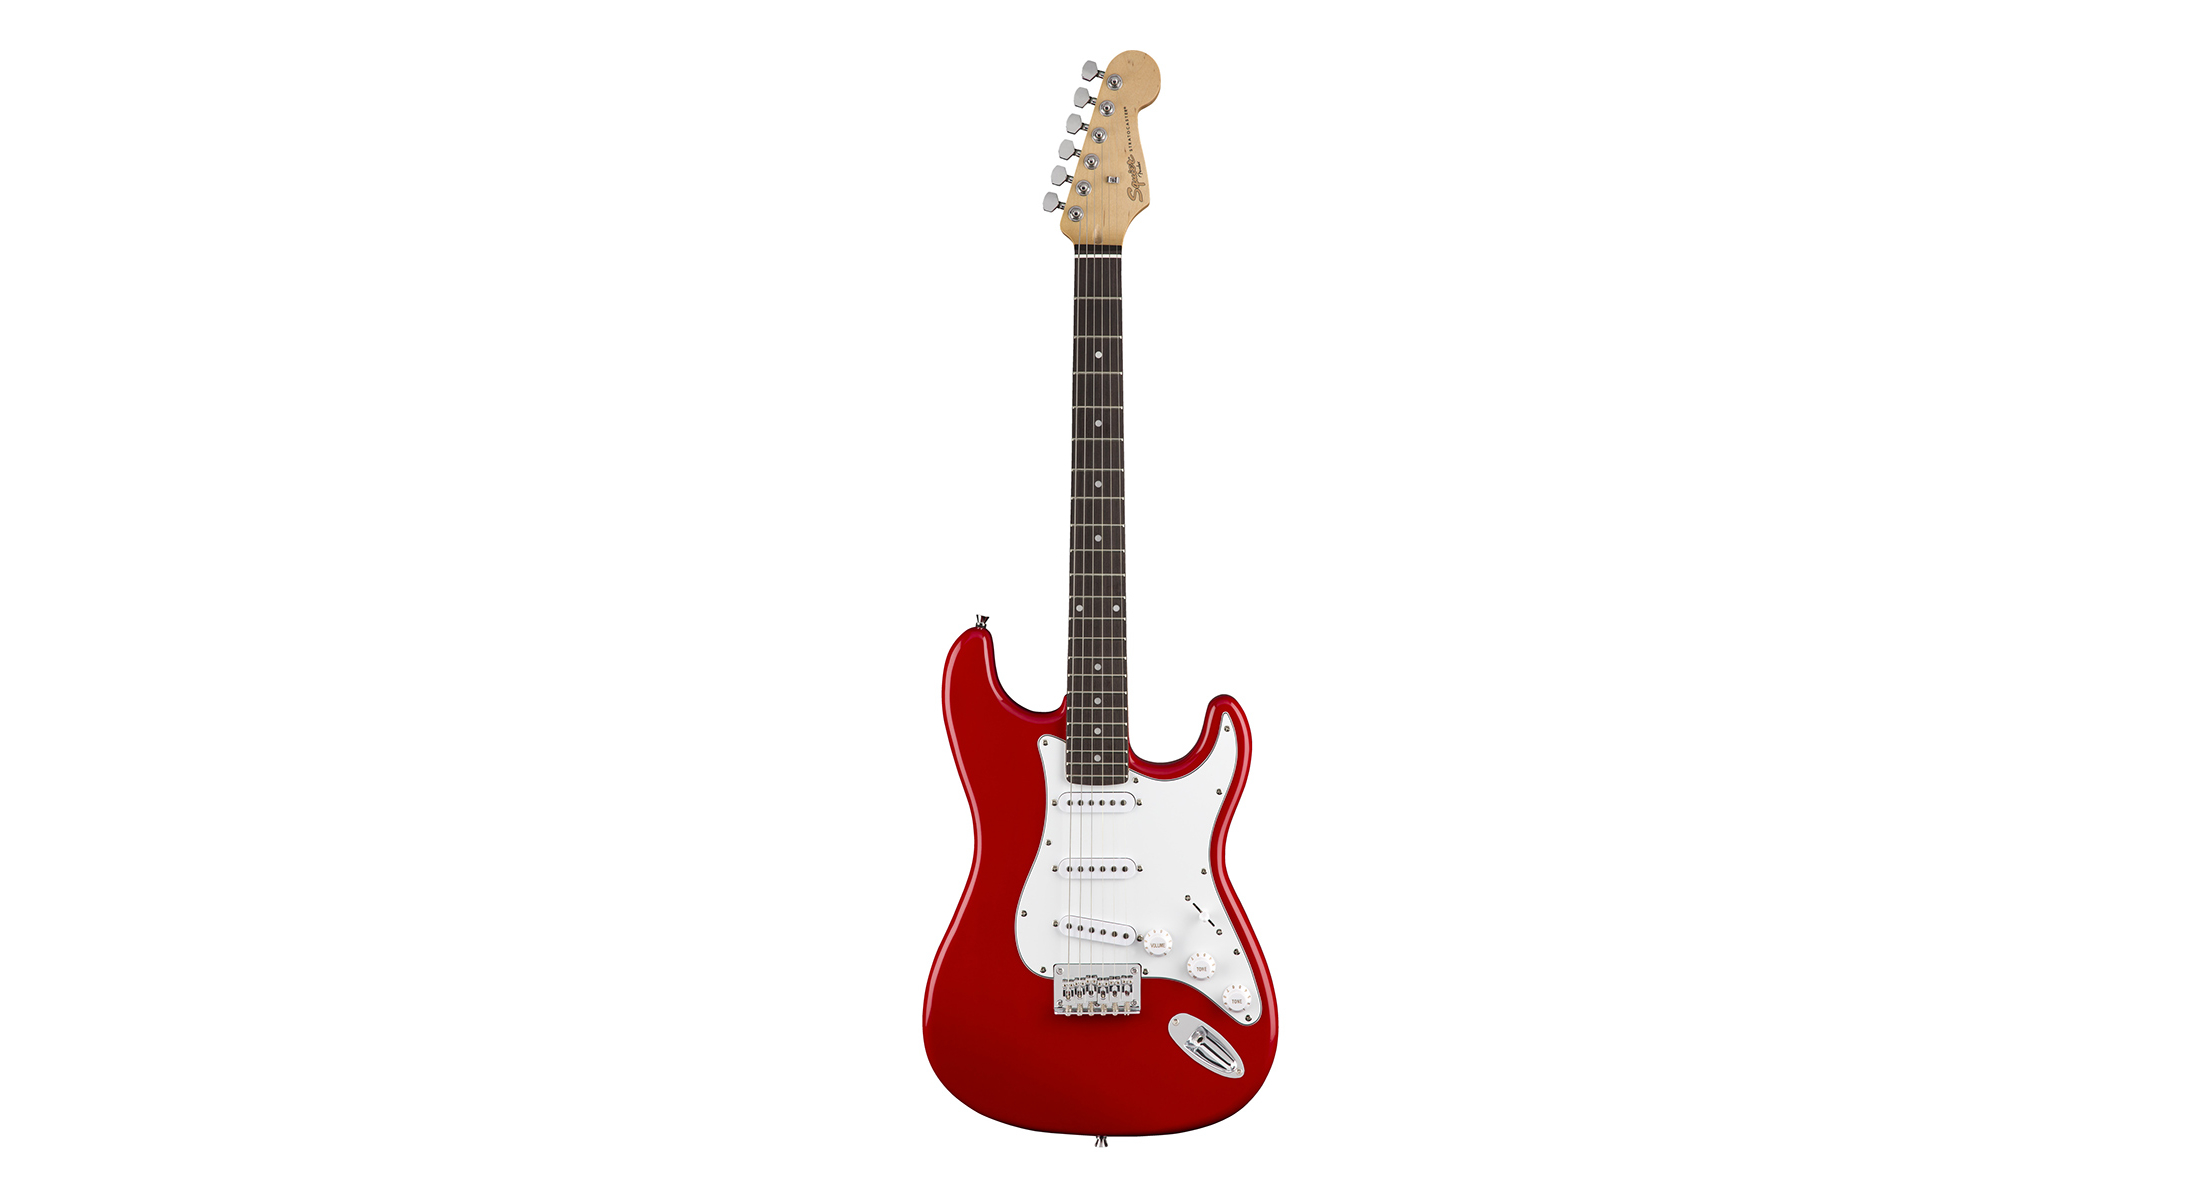 Squier mm stratocaster. Электрогитара Fender mm Stratocaster hard Tail Red. Гитара Fender Squier hard Tail Red Strat. Fender Squier mm hard Tail Red. Гитара Fender Squier mm Stratocaster.